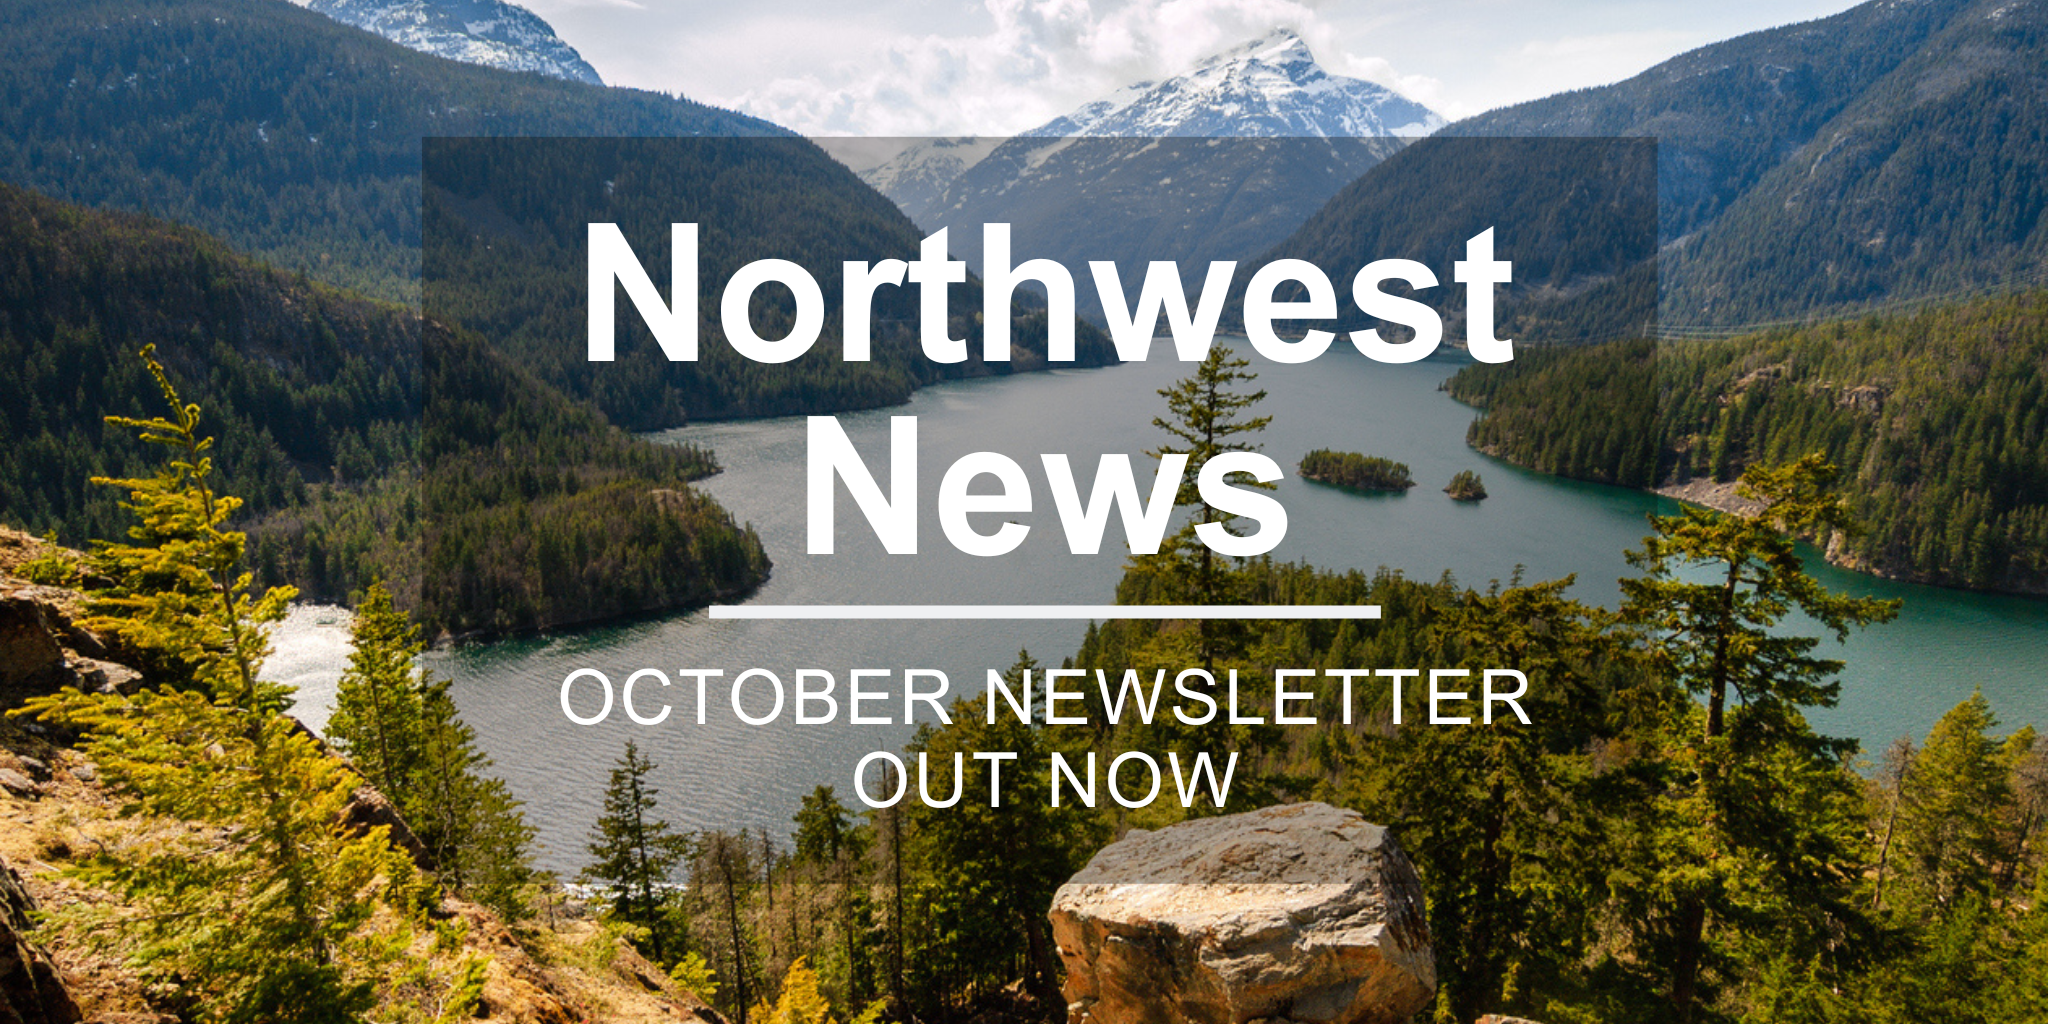 Region 10 image of Diablo Lake with the text Northwest News: October Newsletter Out Now